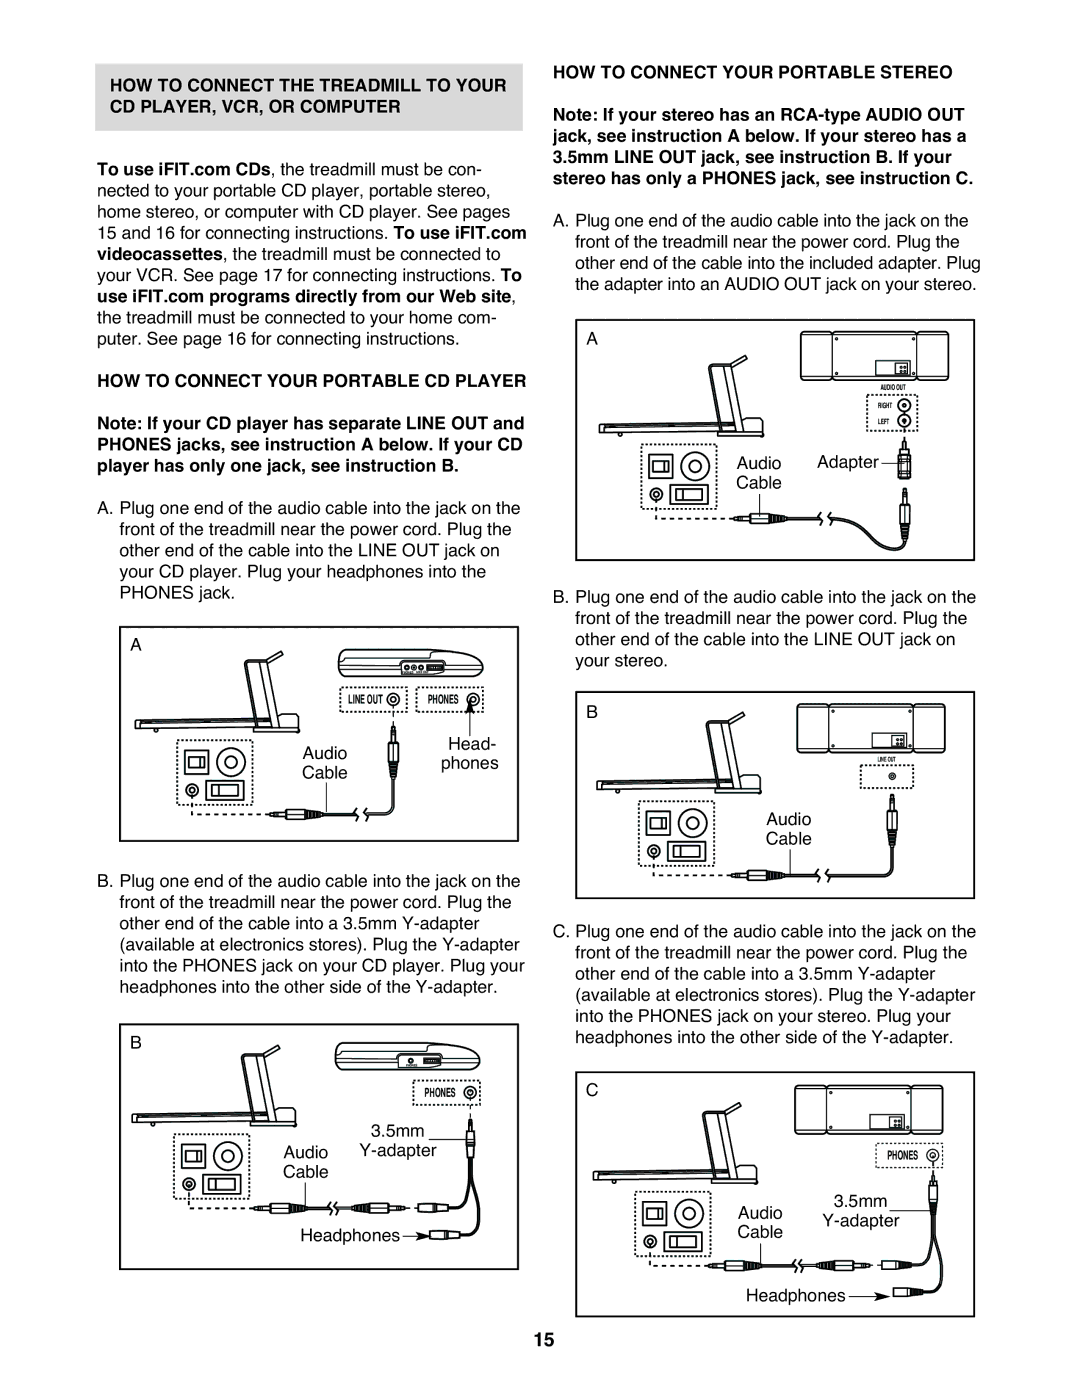 ProForm PFTL71230 user manual HOW to Connect Your Portable Stereo 